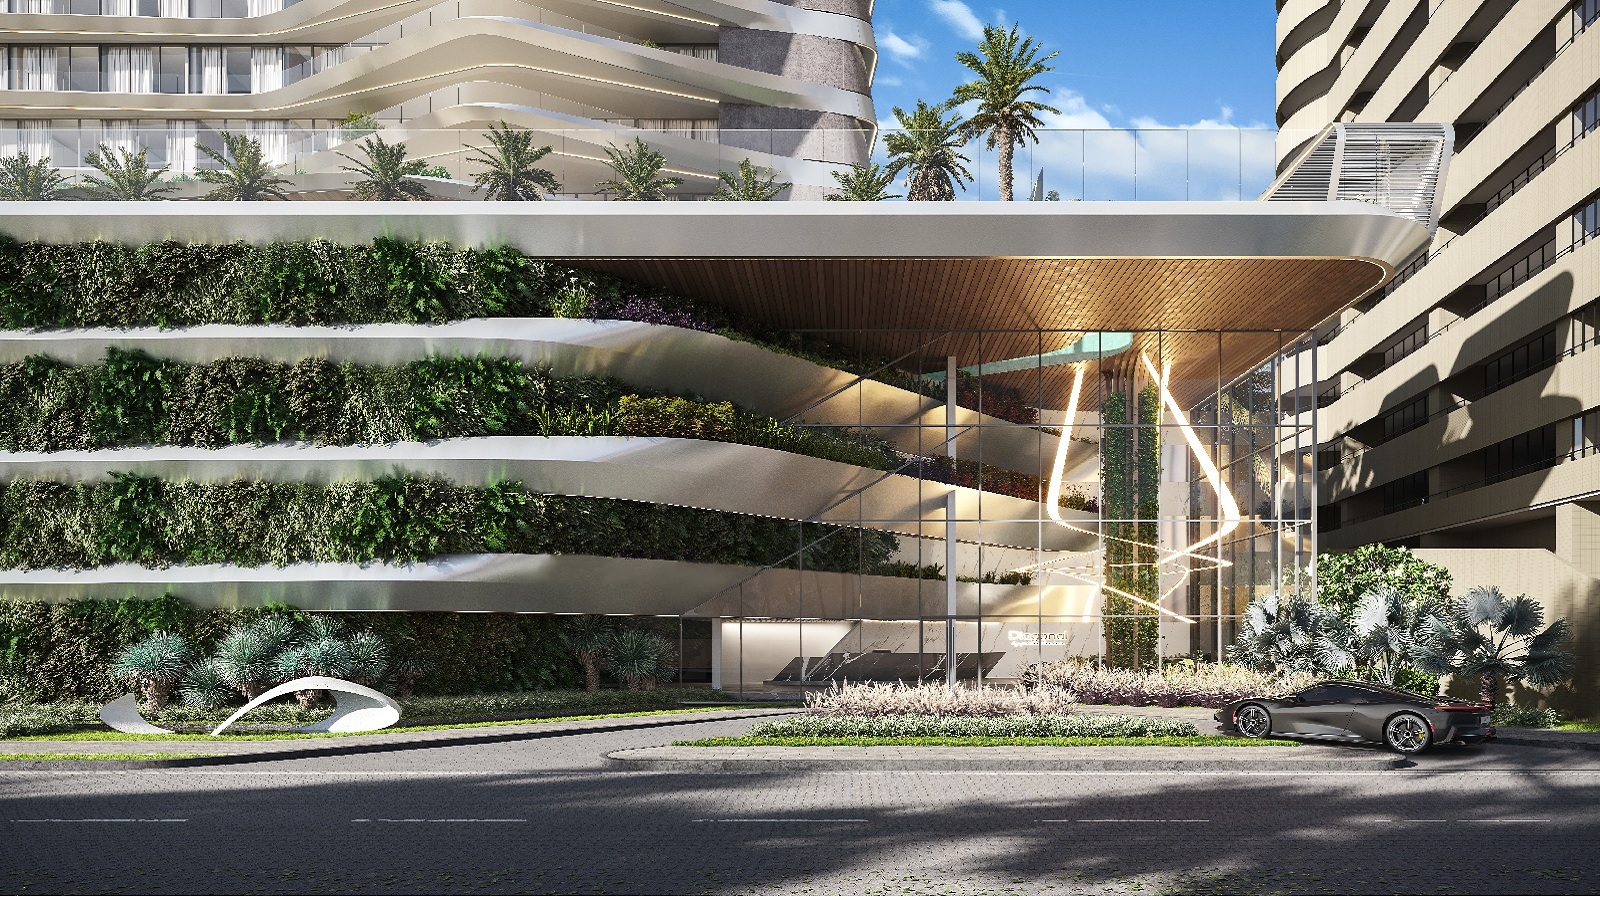 Diagonal by Pininfarina is a masterpiece of luxury and design in Brazil’s Fortaleza